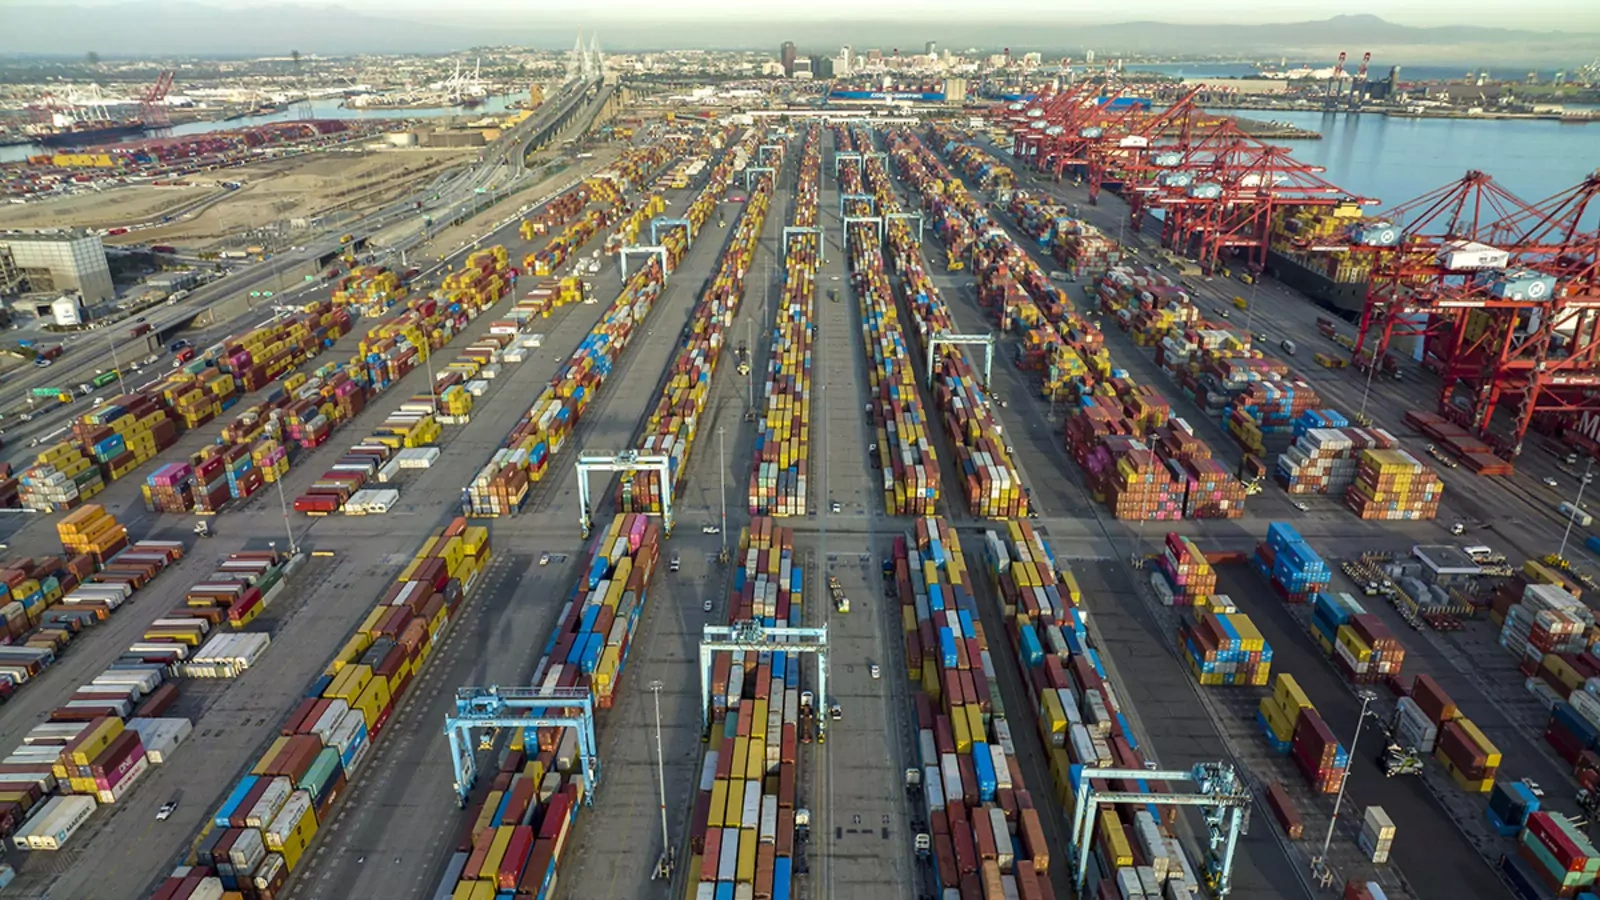 Shipping containers are stacked at the Port of Long Beach, California, in November 2021.